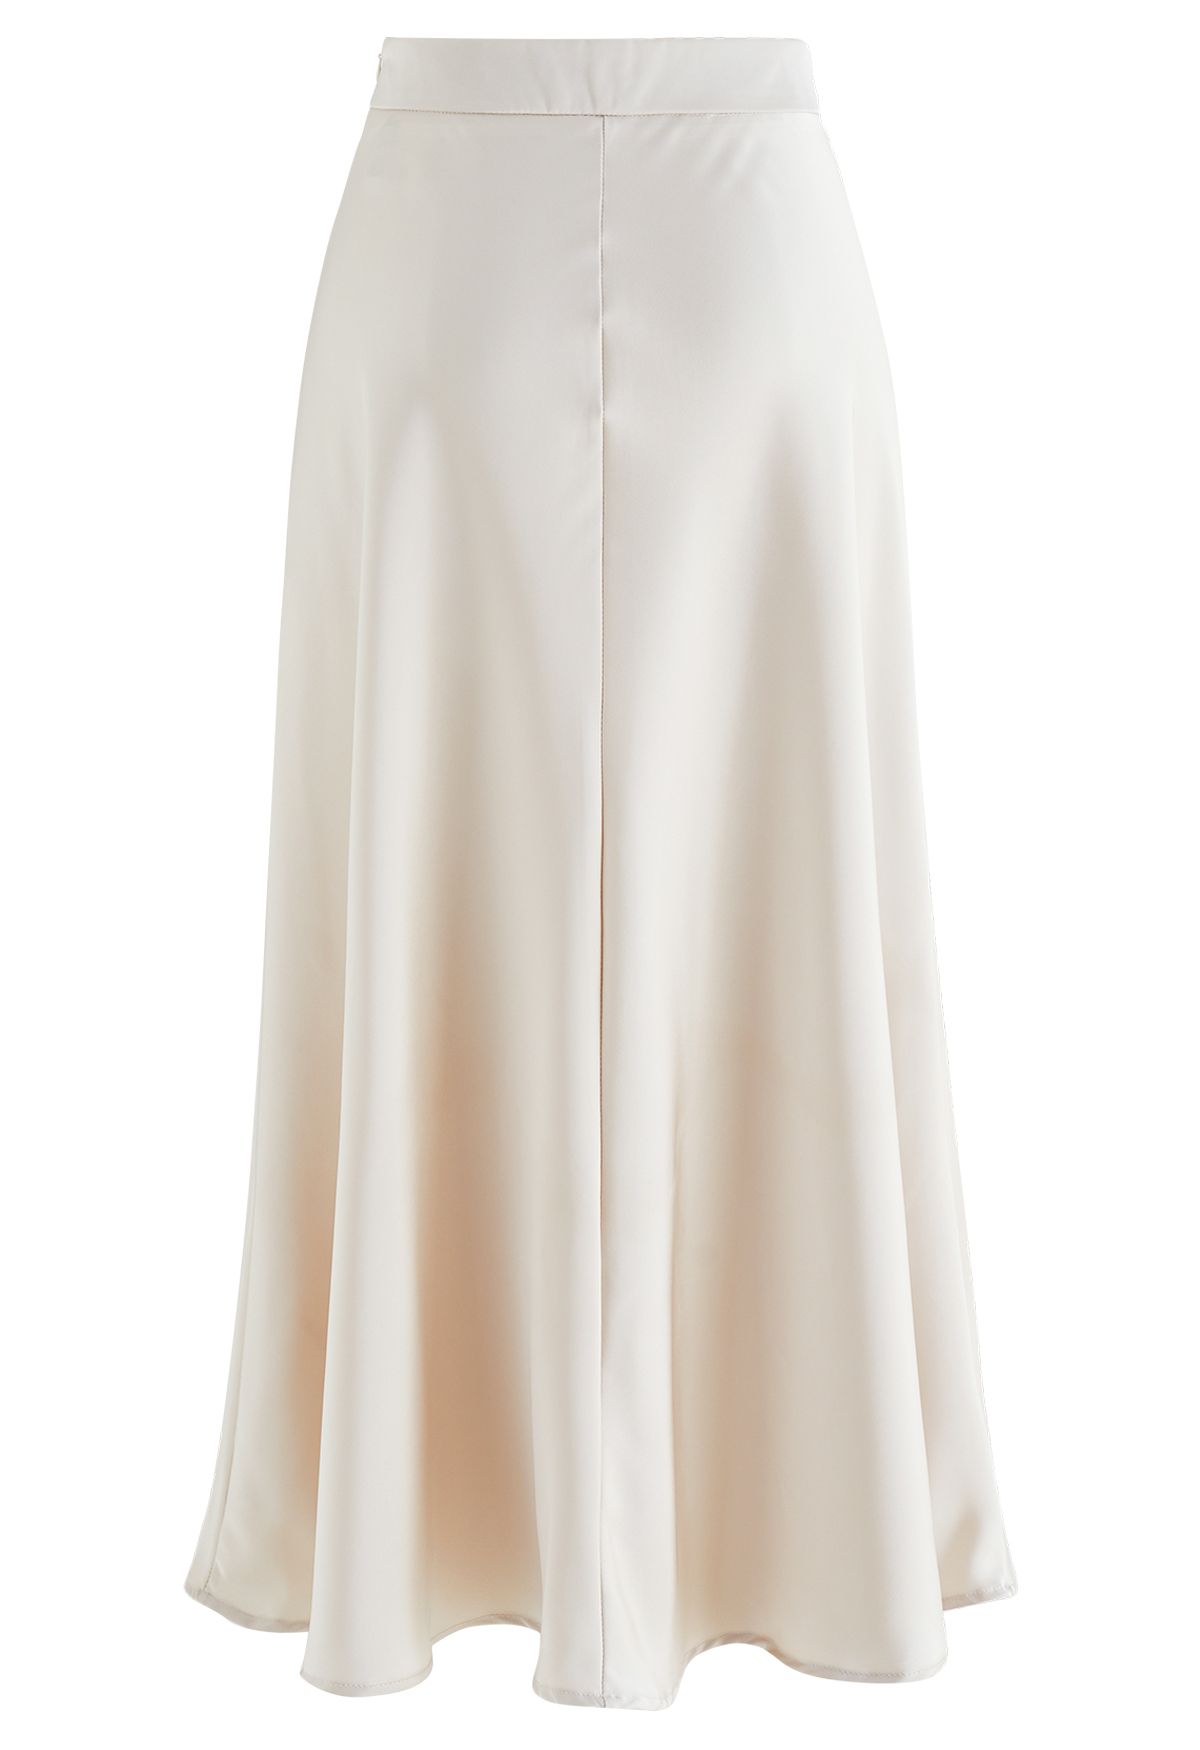 Middle Seam Smooth Satin Drape Maxi Skirt in Ivory